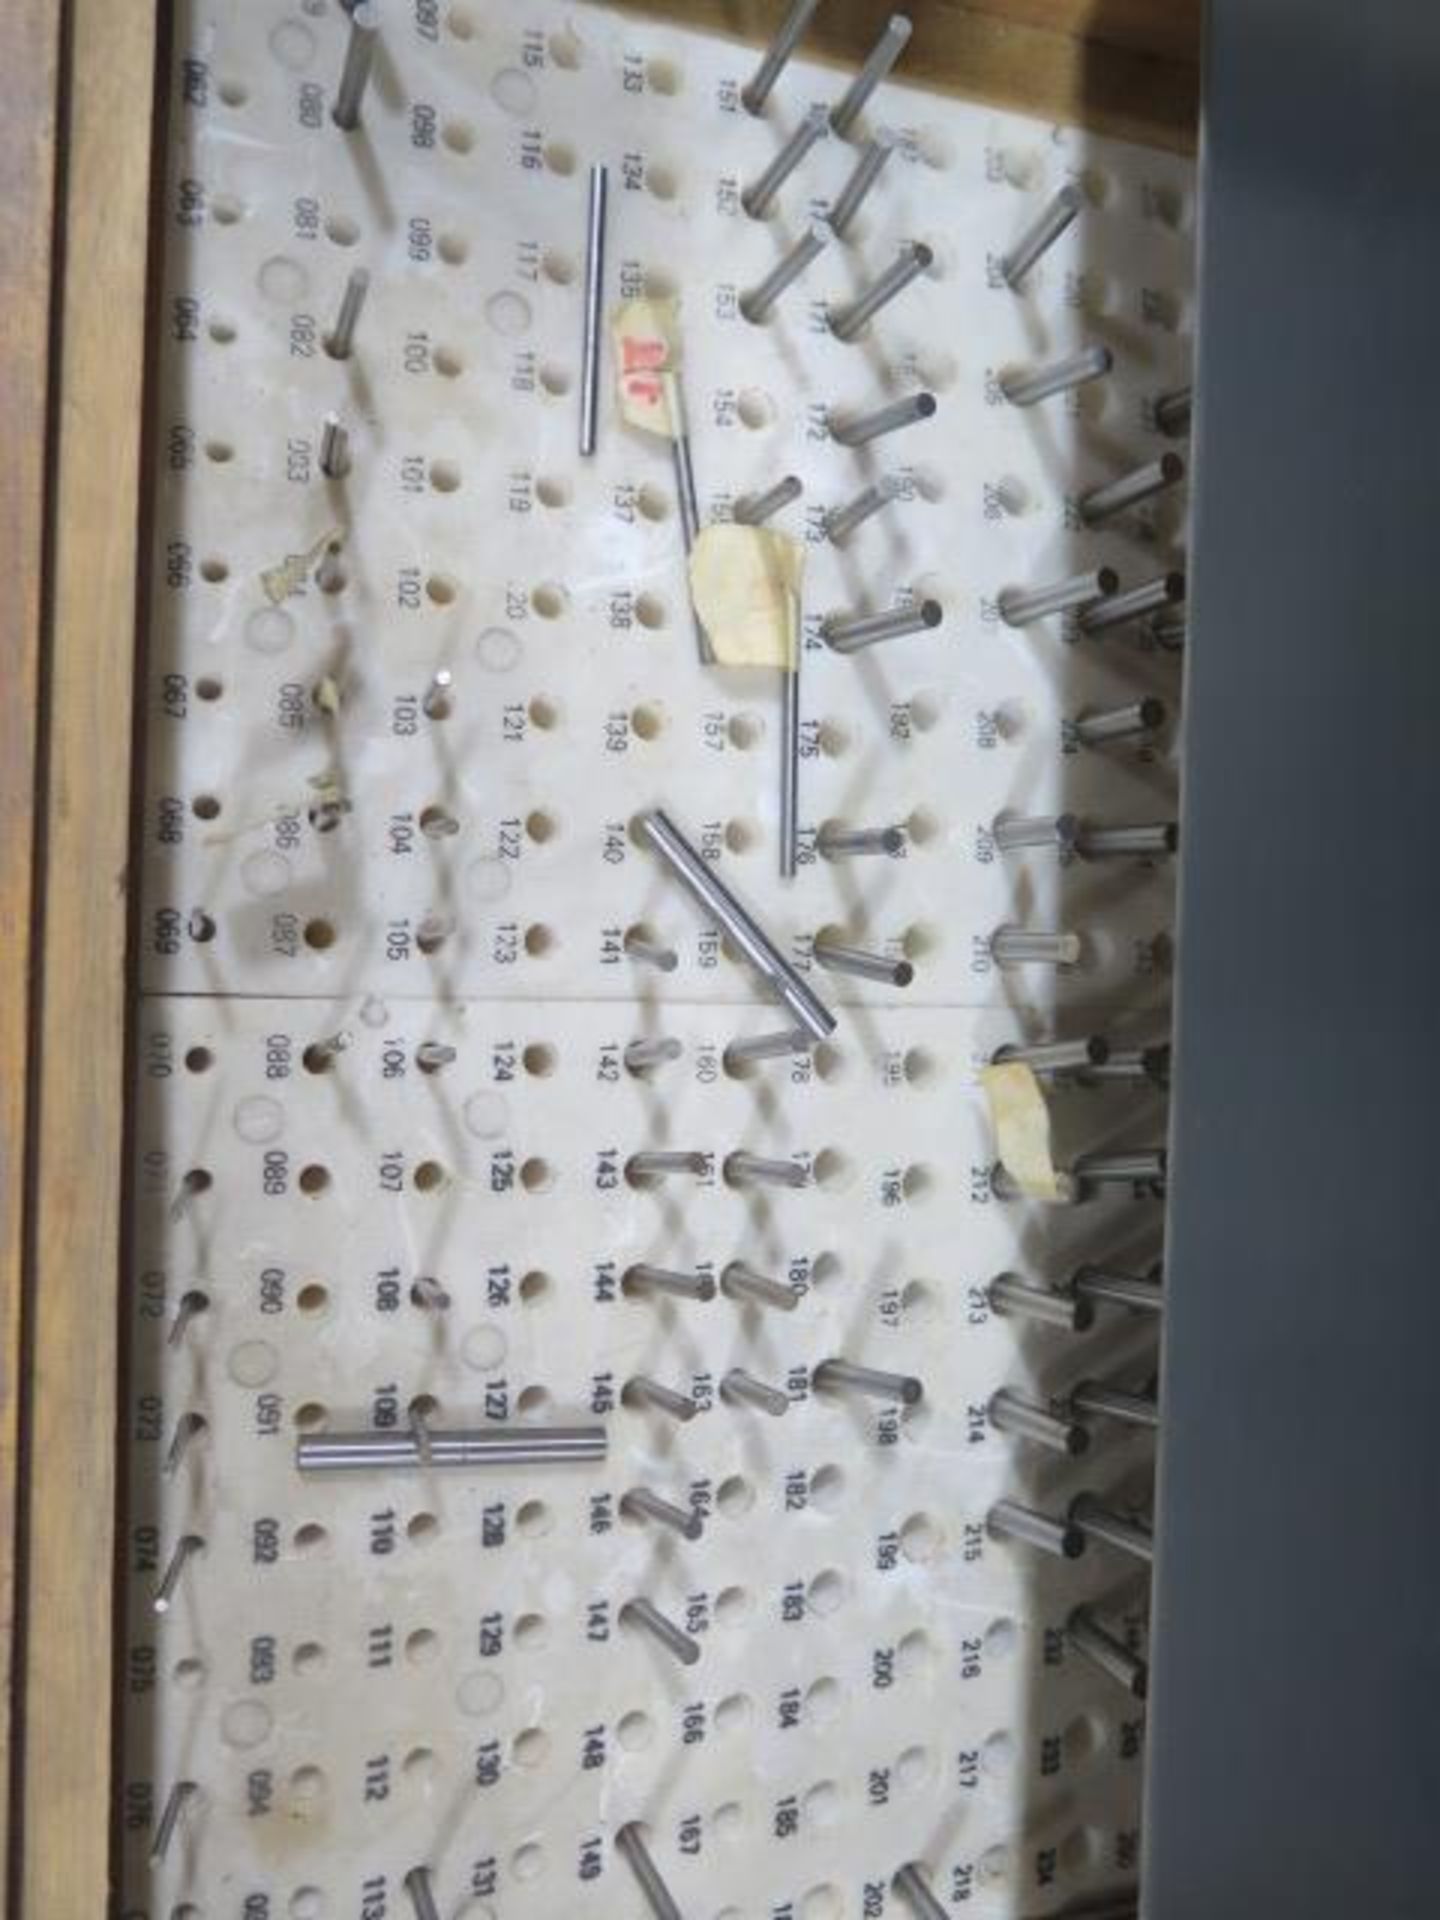 Pin Gage Cabinet and Pin Sets - Image 2 of 4